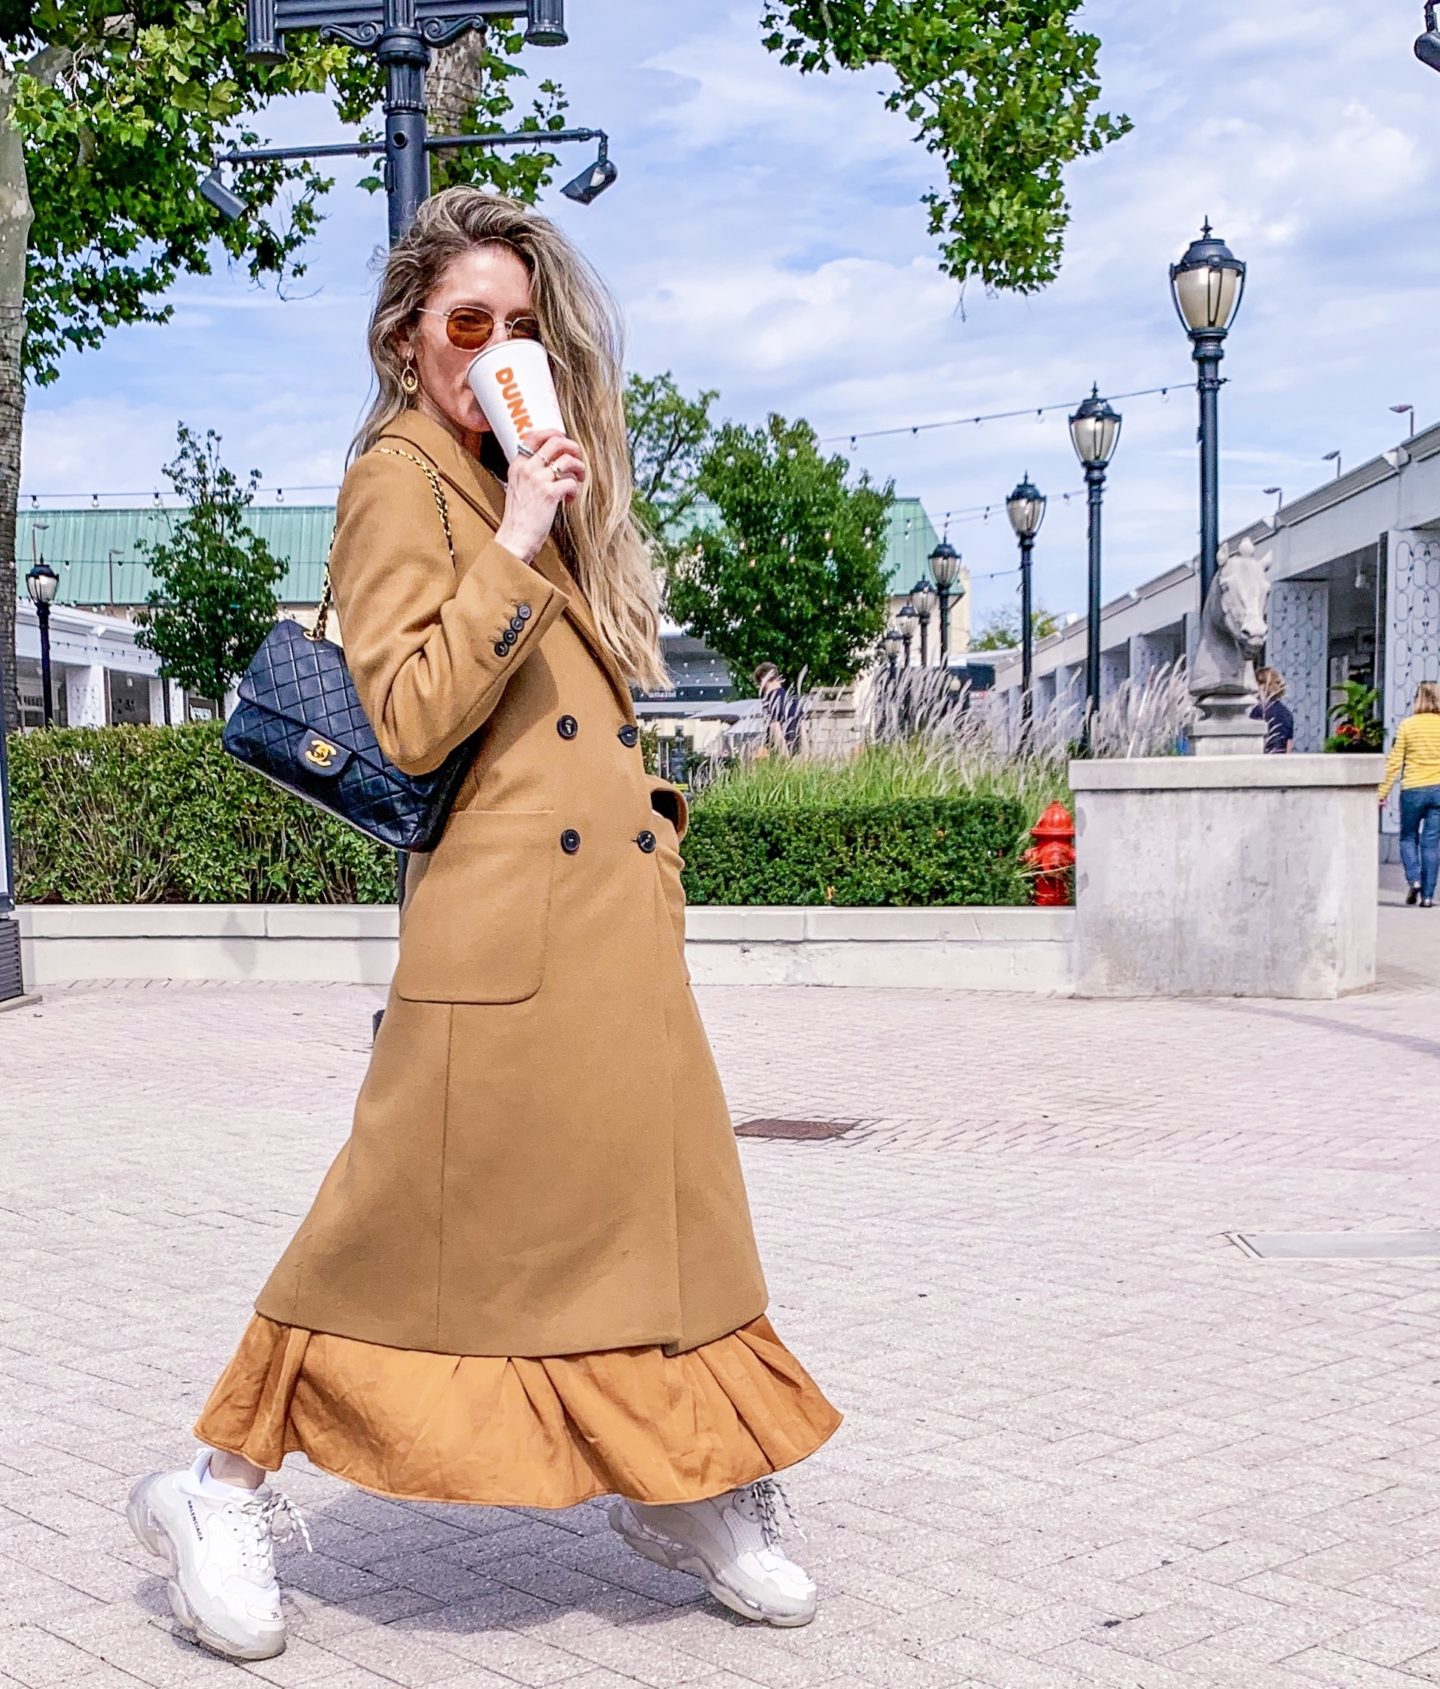 Check out Chic Coats Guide for the ultimate coat inspiration finds! Find the coat of your dreams for a great price and enjoy it this season! 